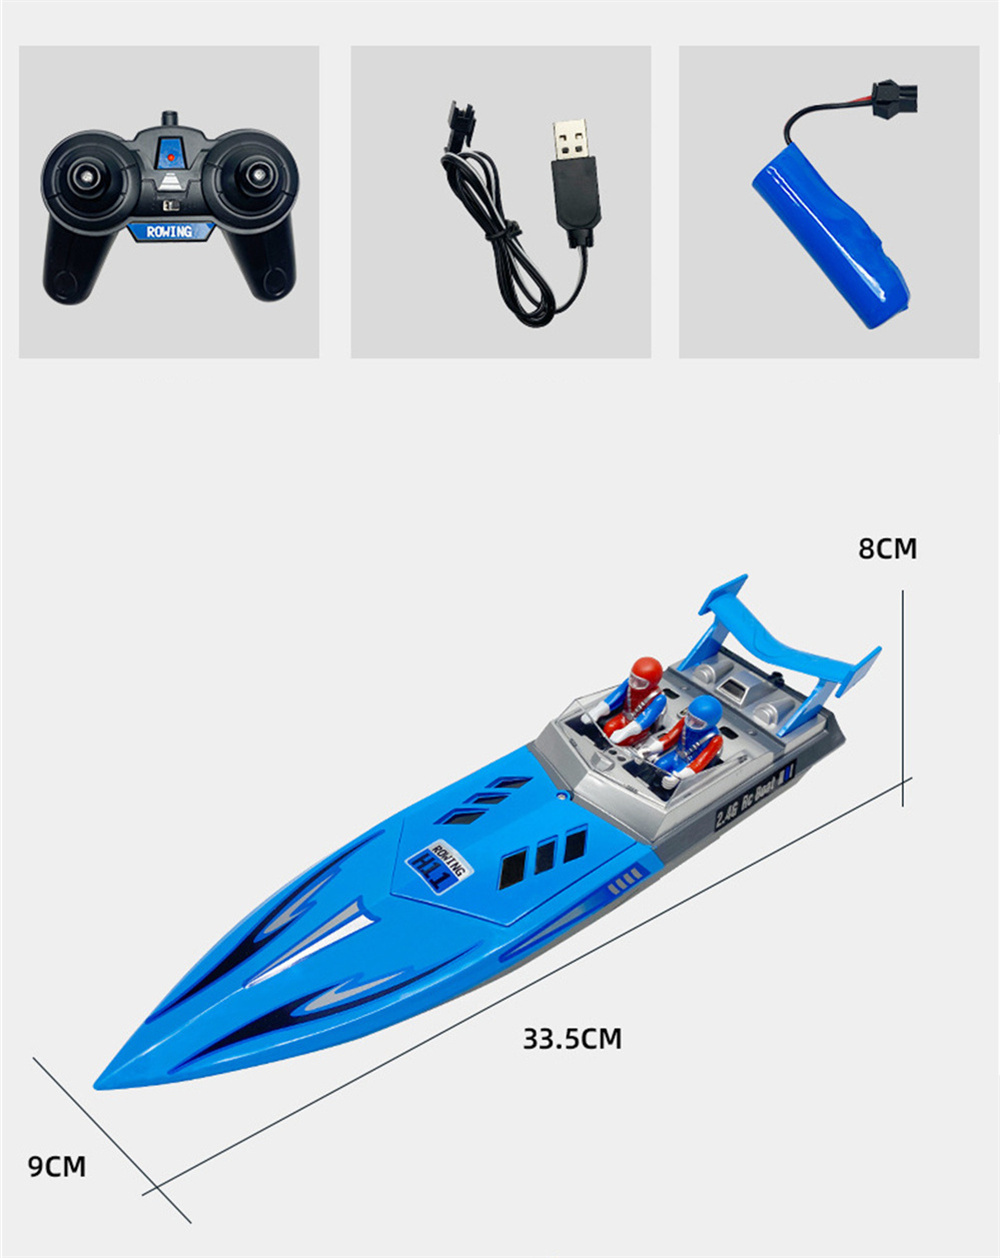 H11 2.4G 4CH RC Boat Vehicles Models High Speed Speedboat Waterproof 20km/h Electric Racing Lakes Pools Remote Control Toys